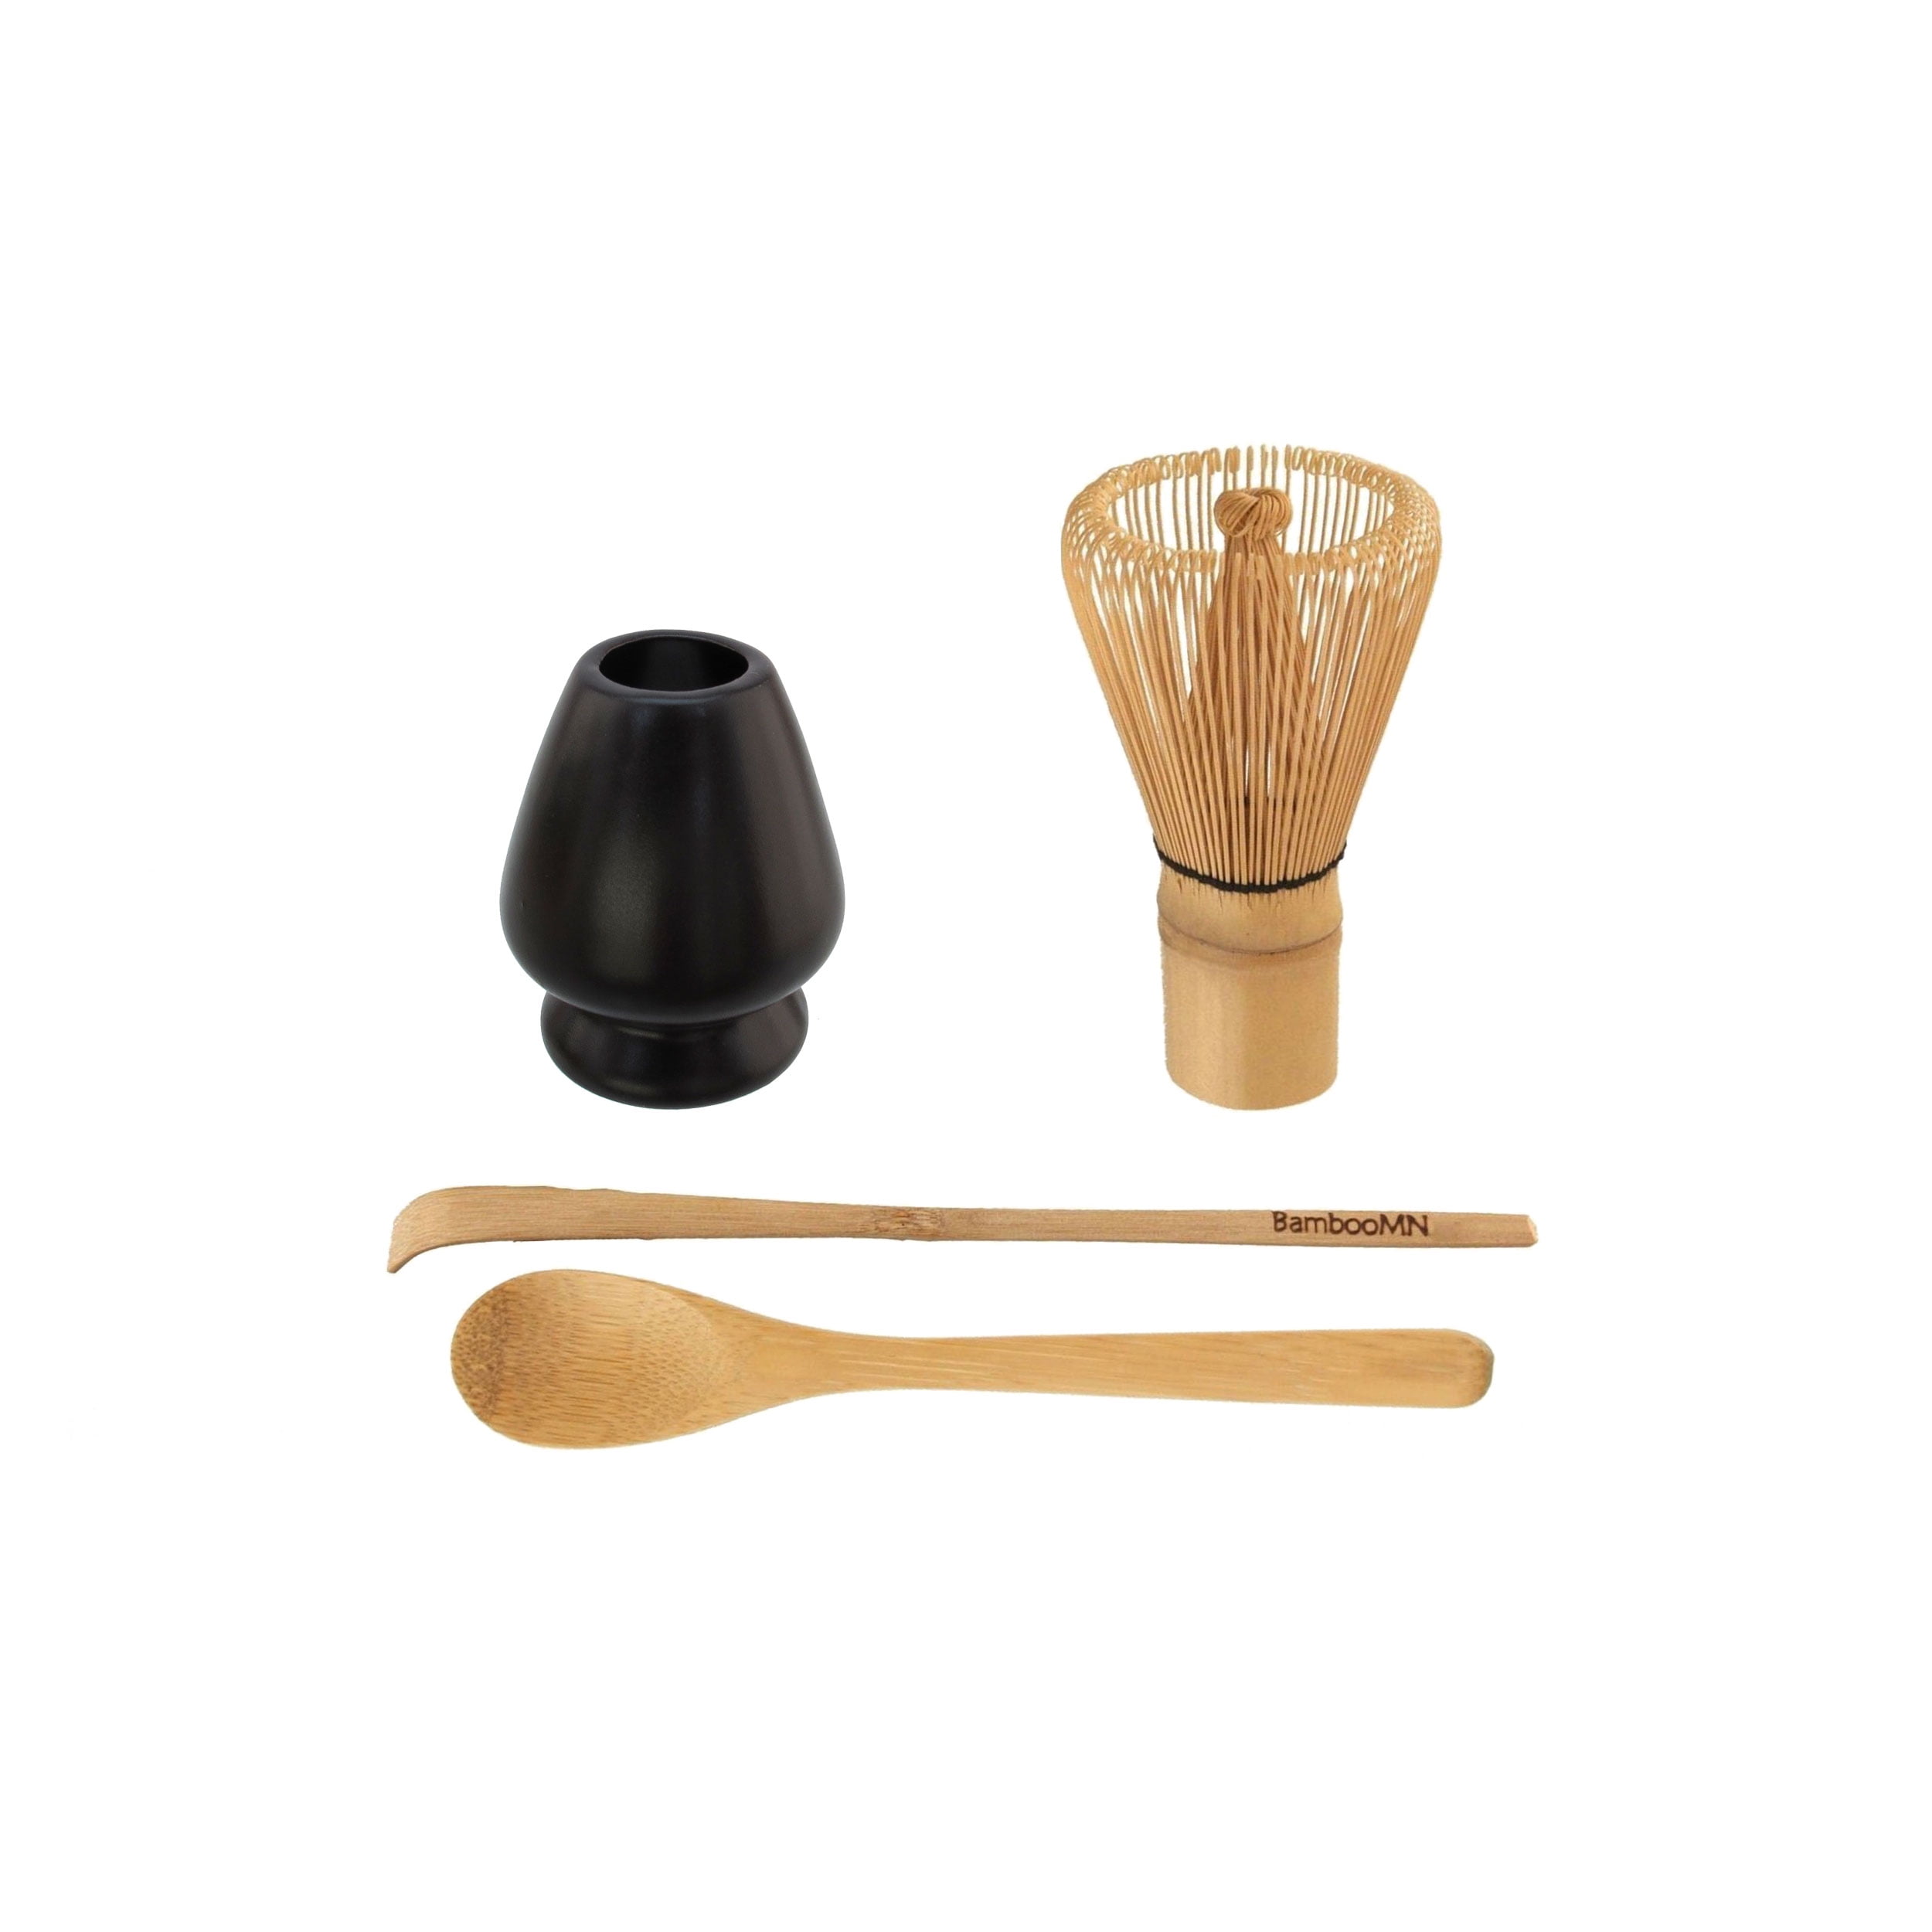 Whisk + Scoop & Spoon Matcha Whisk Sets